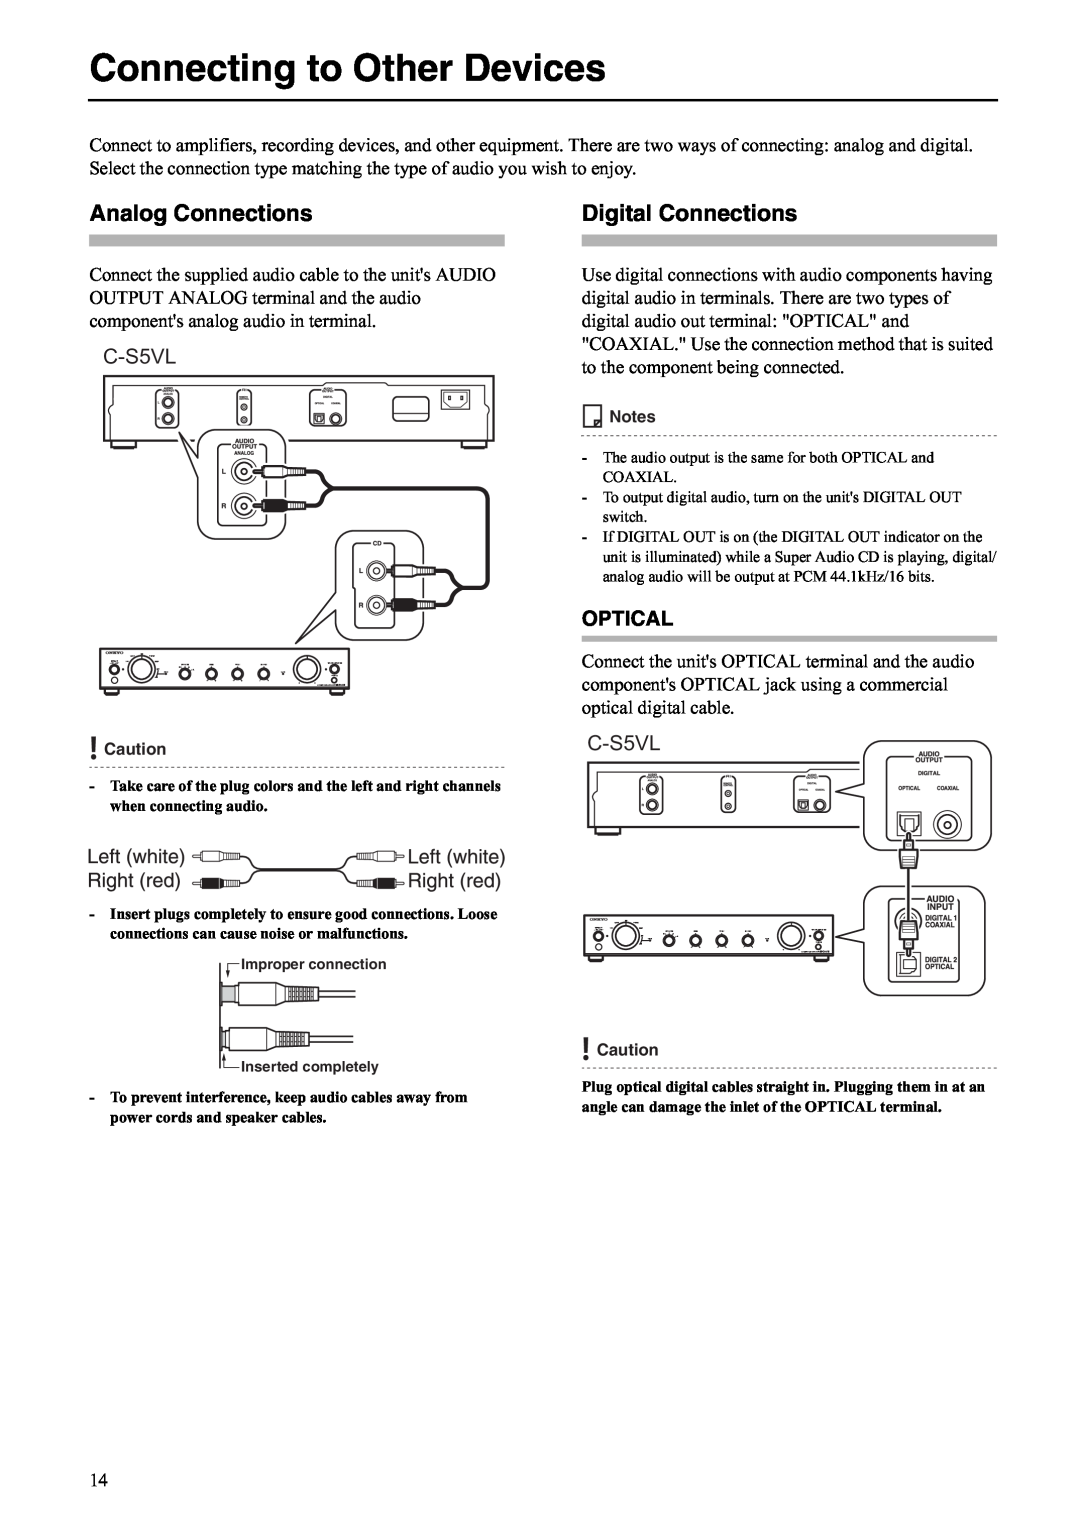 Onkyo C-S5VL instruction manual Connecting to Other Devices, Analog Connections, Digital Connections, Optical 